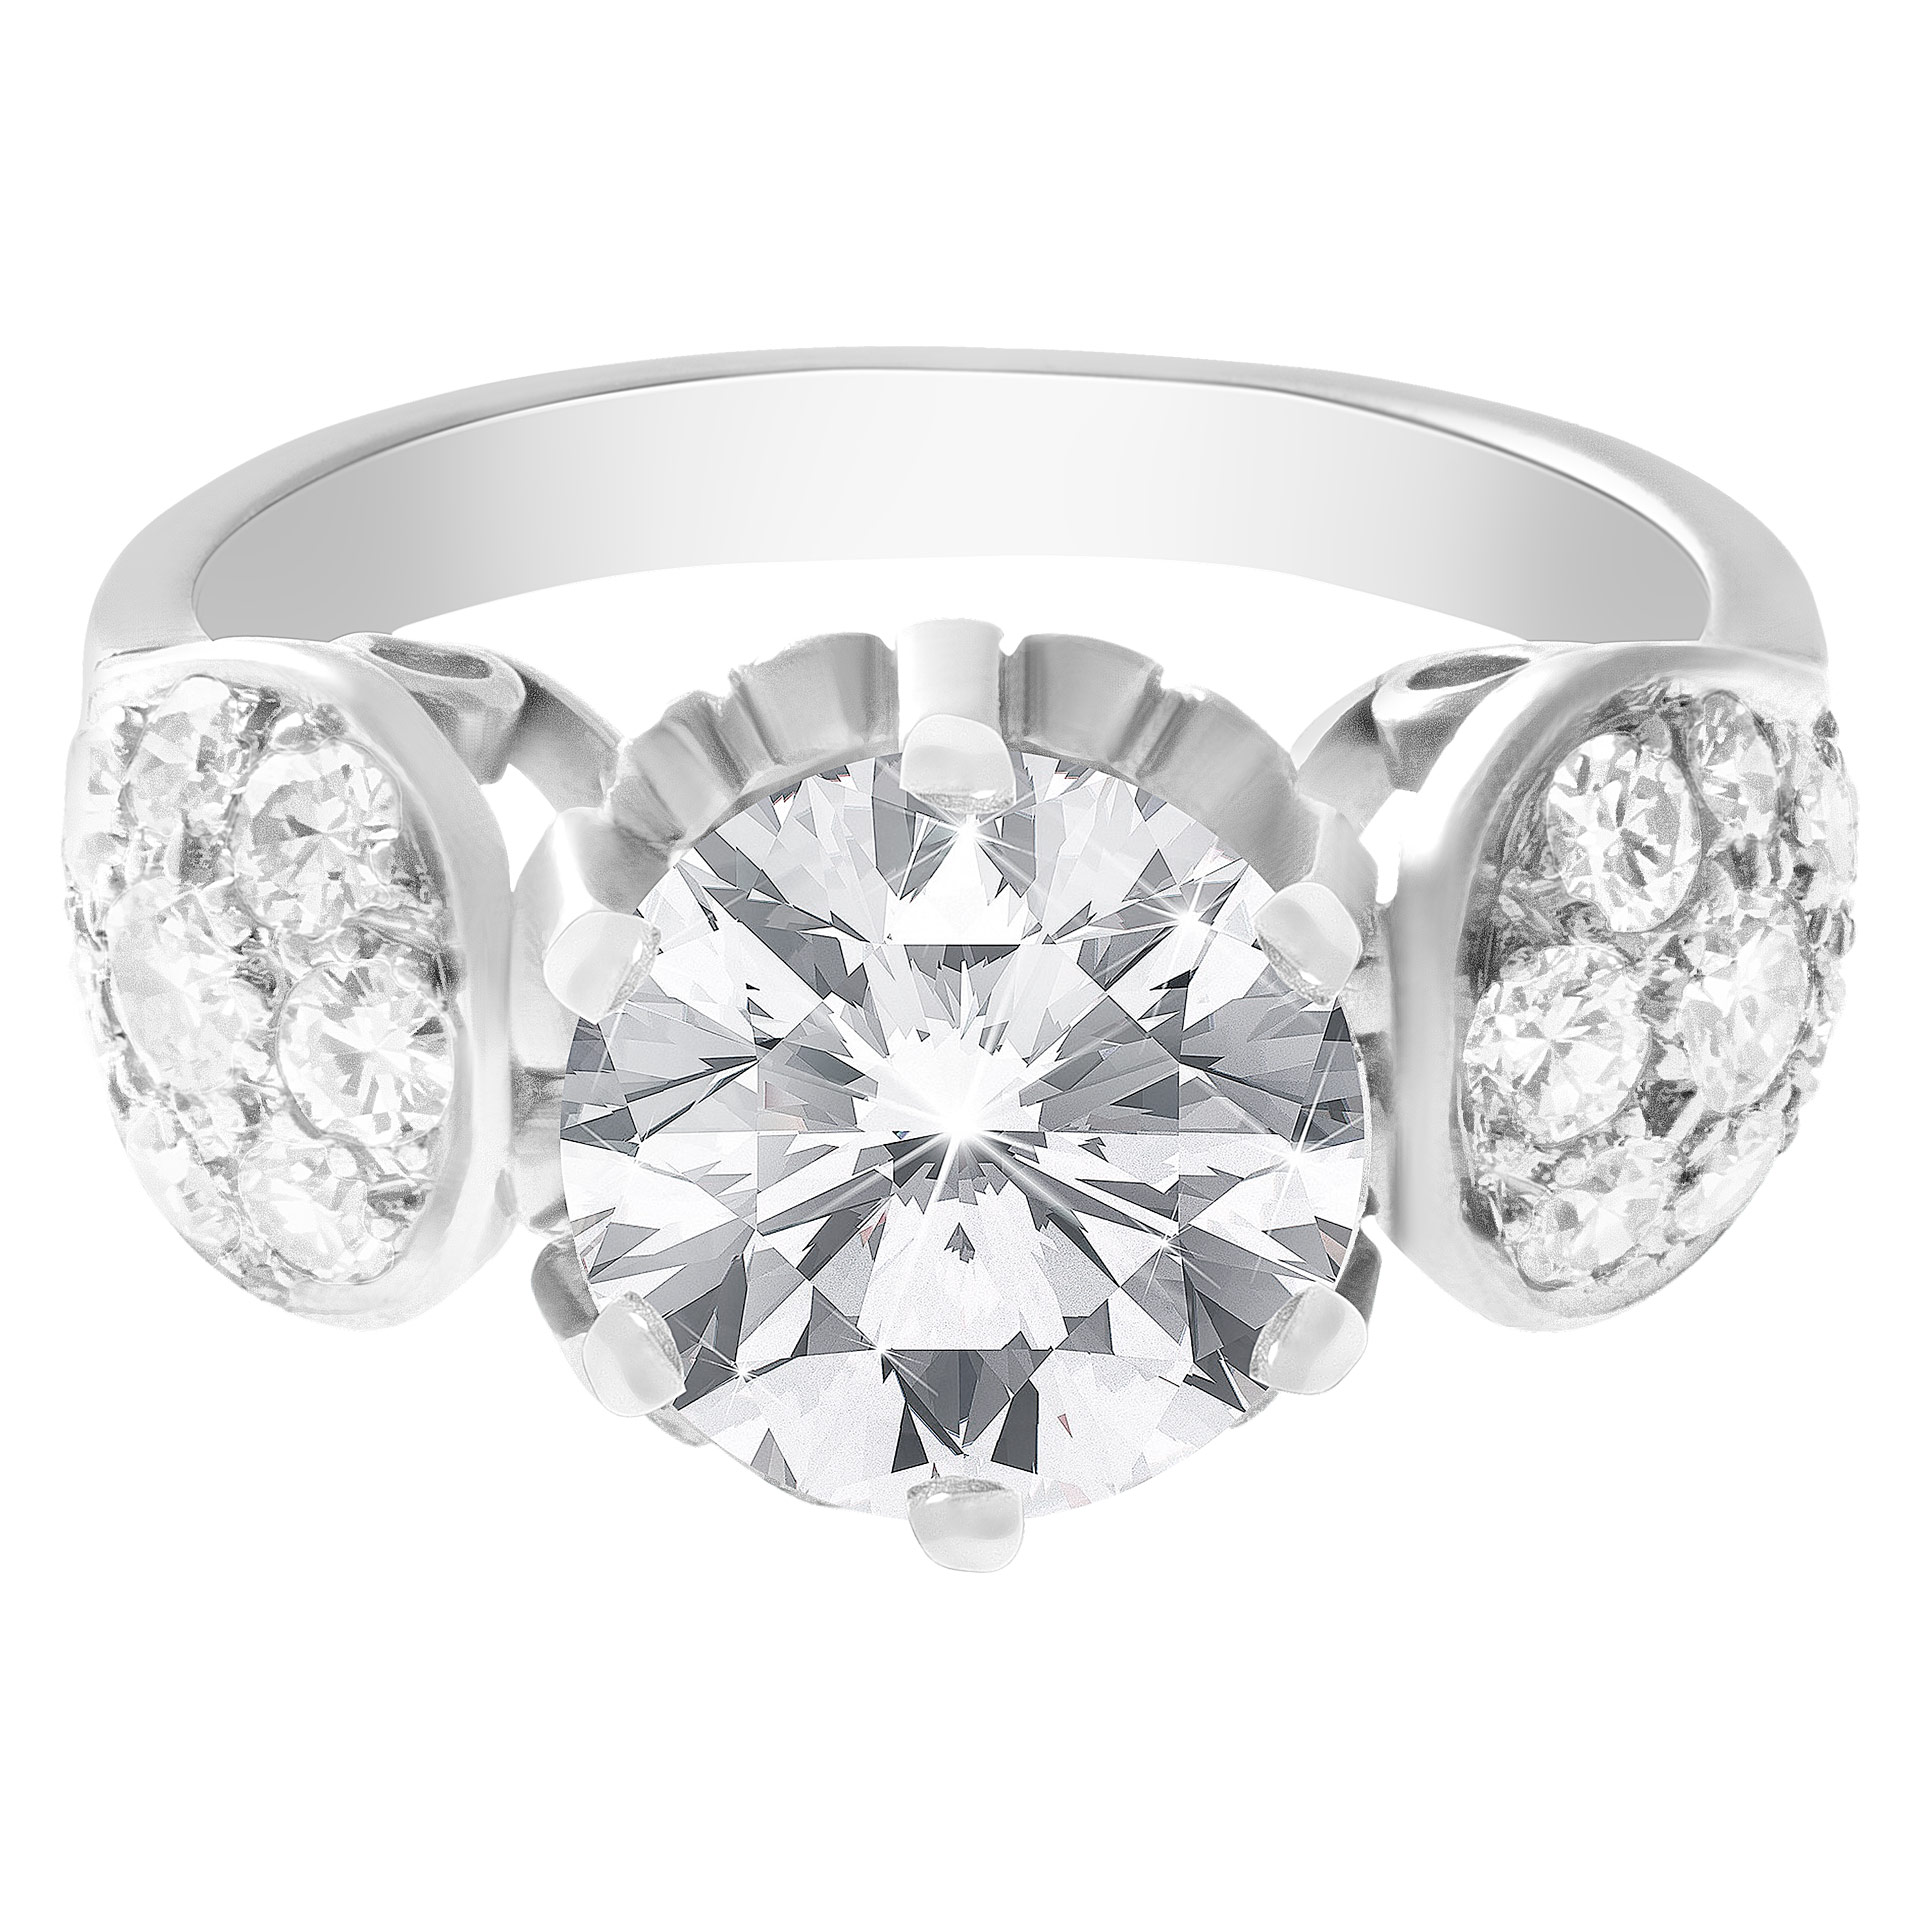 GIA certified Circular brilliant diamond 2.44 cts (I color, VS1 clarity) ring set in 18k white gold. Size 7